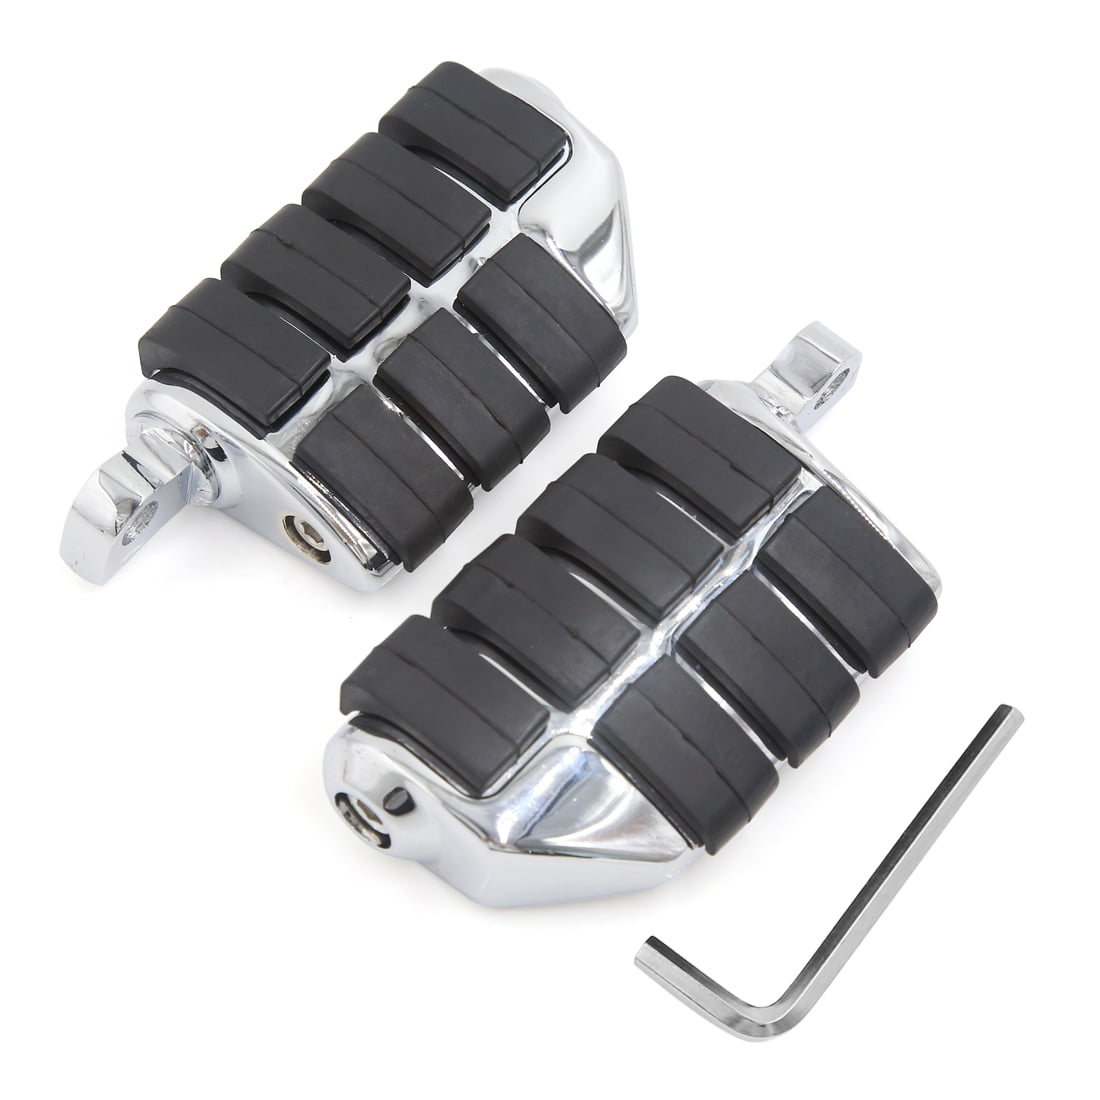 Chrome Wing Foot Pegs Rests For Harley-Davidson Male Style Footpeg Mount